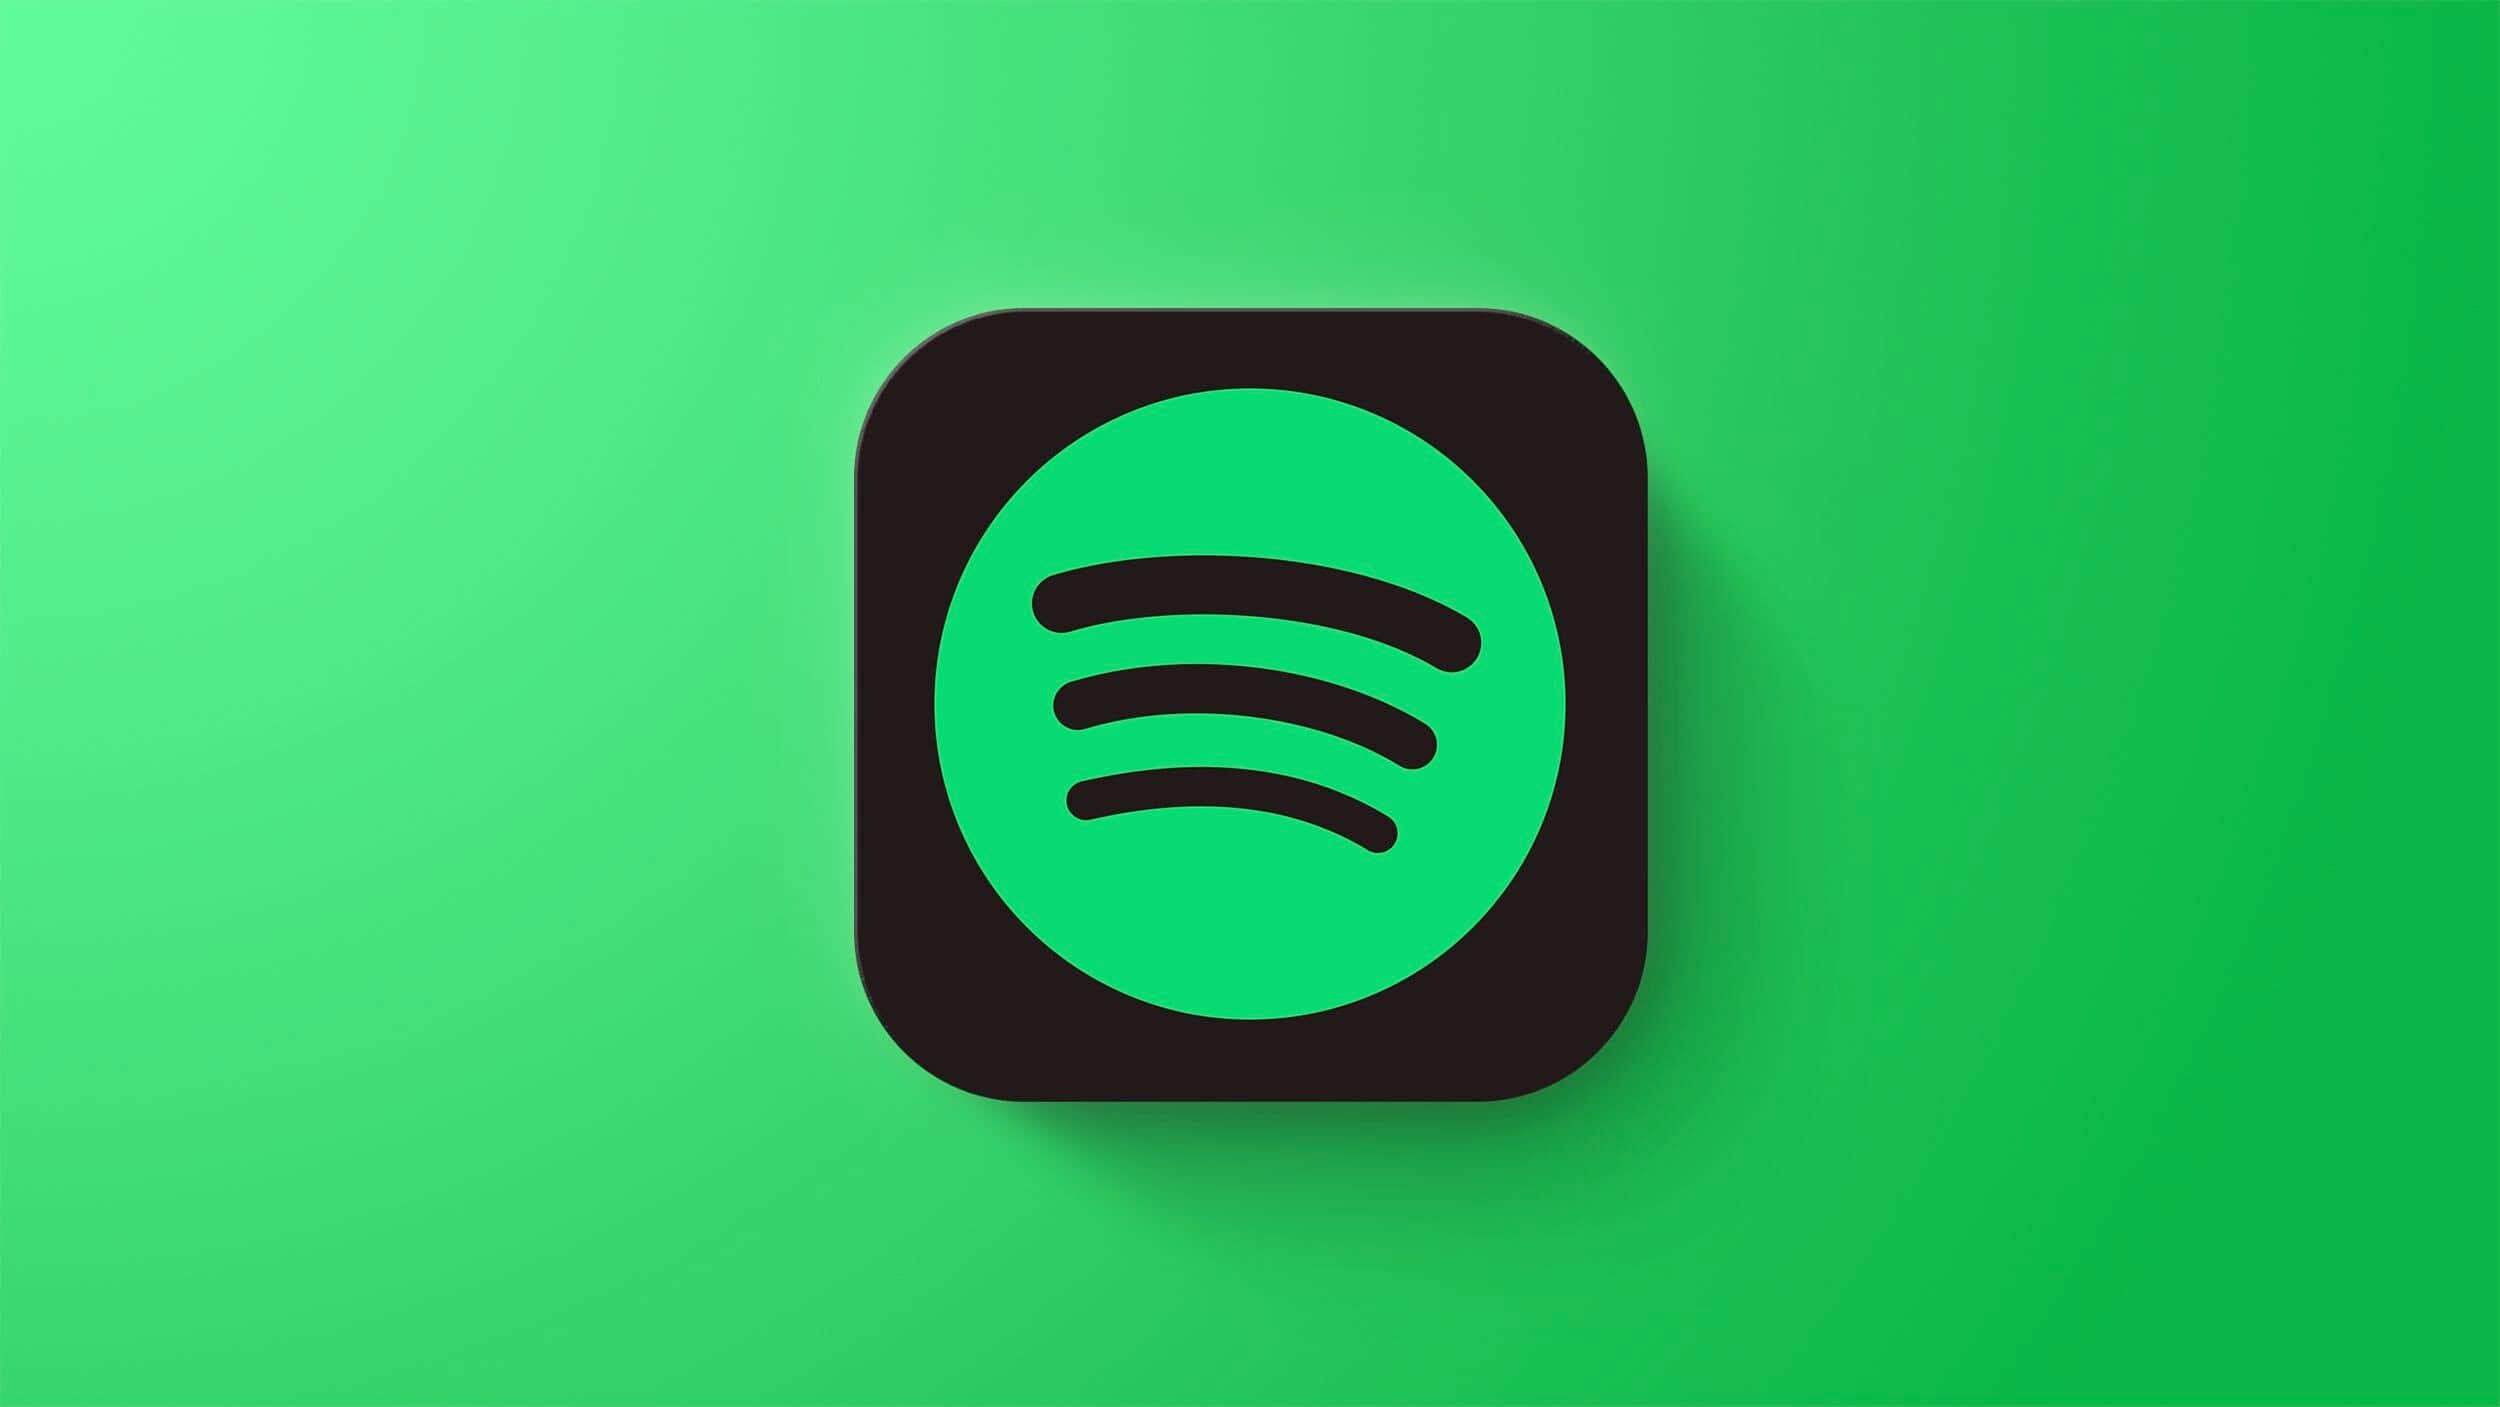 Spotify launches new affordable Premium plan but without audiobooks